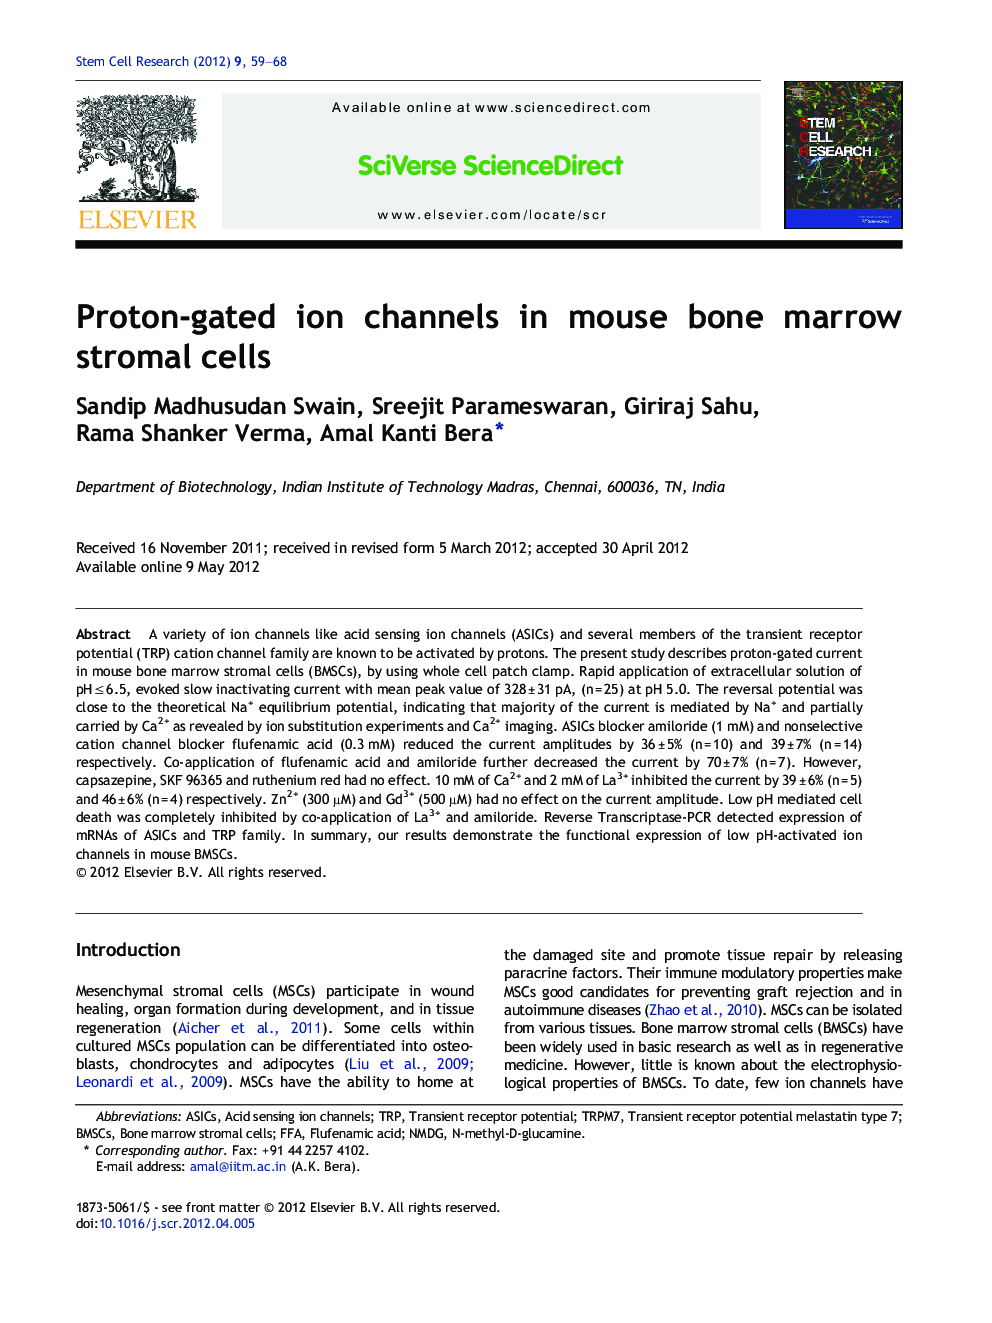 Proton-gated ion channels in mouse bone marrow stromal cells